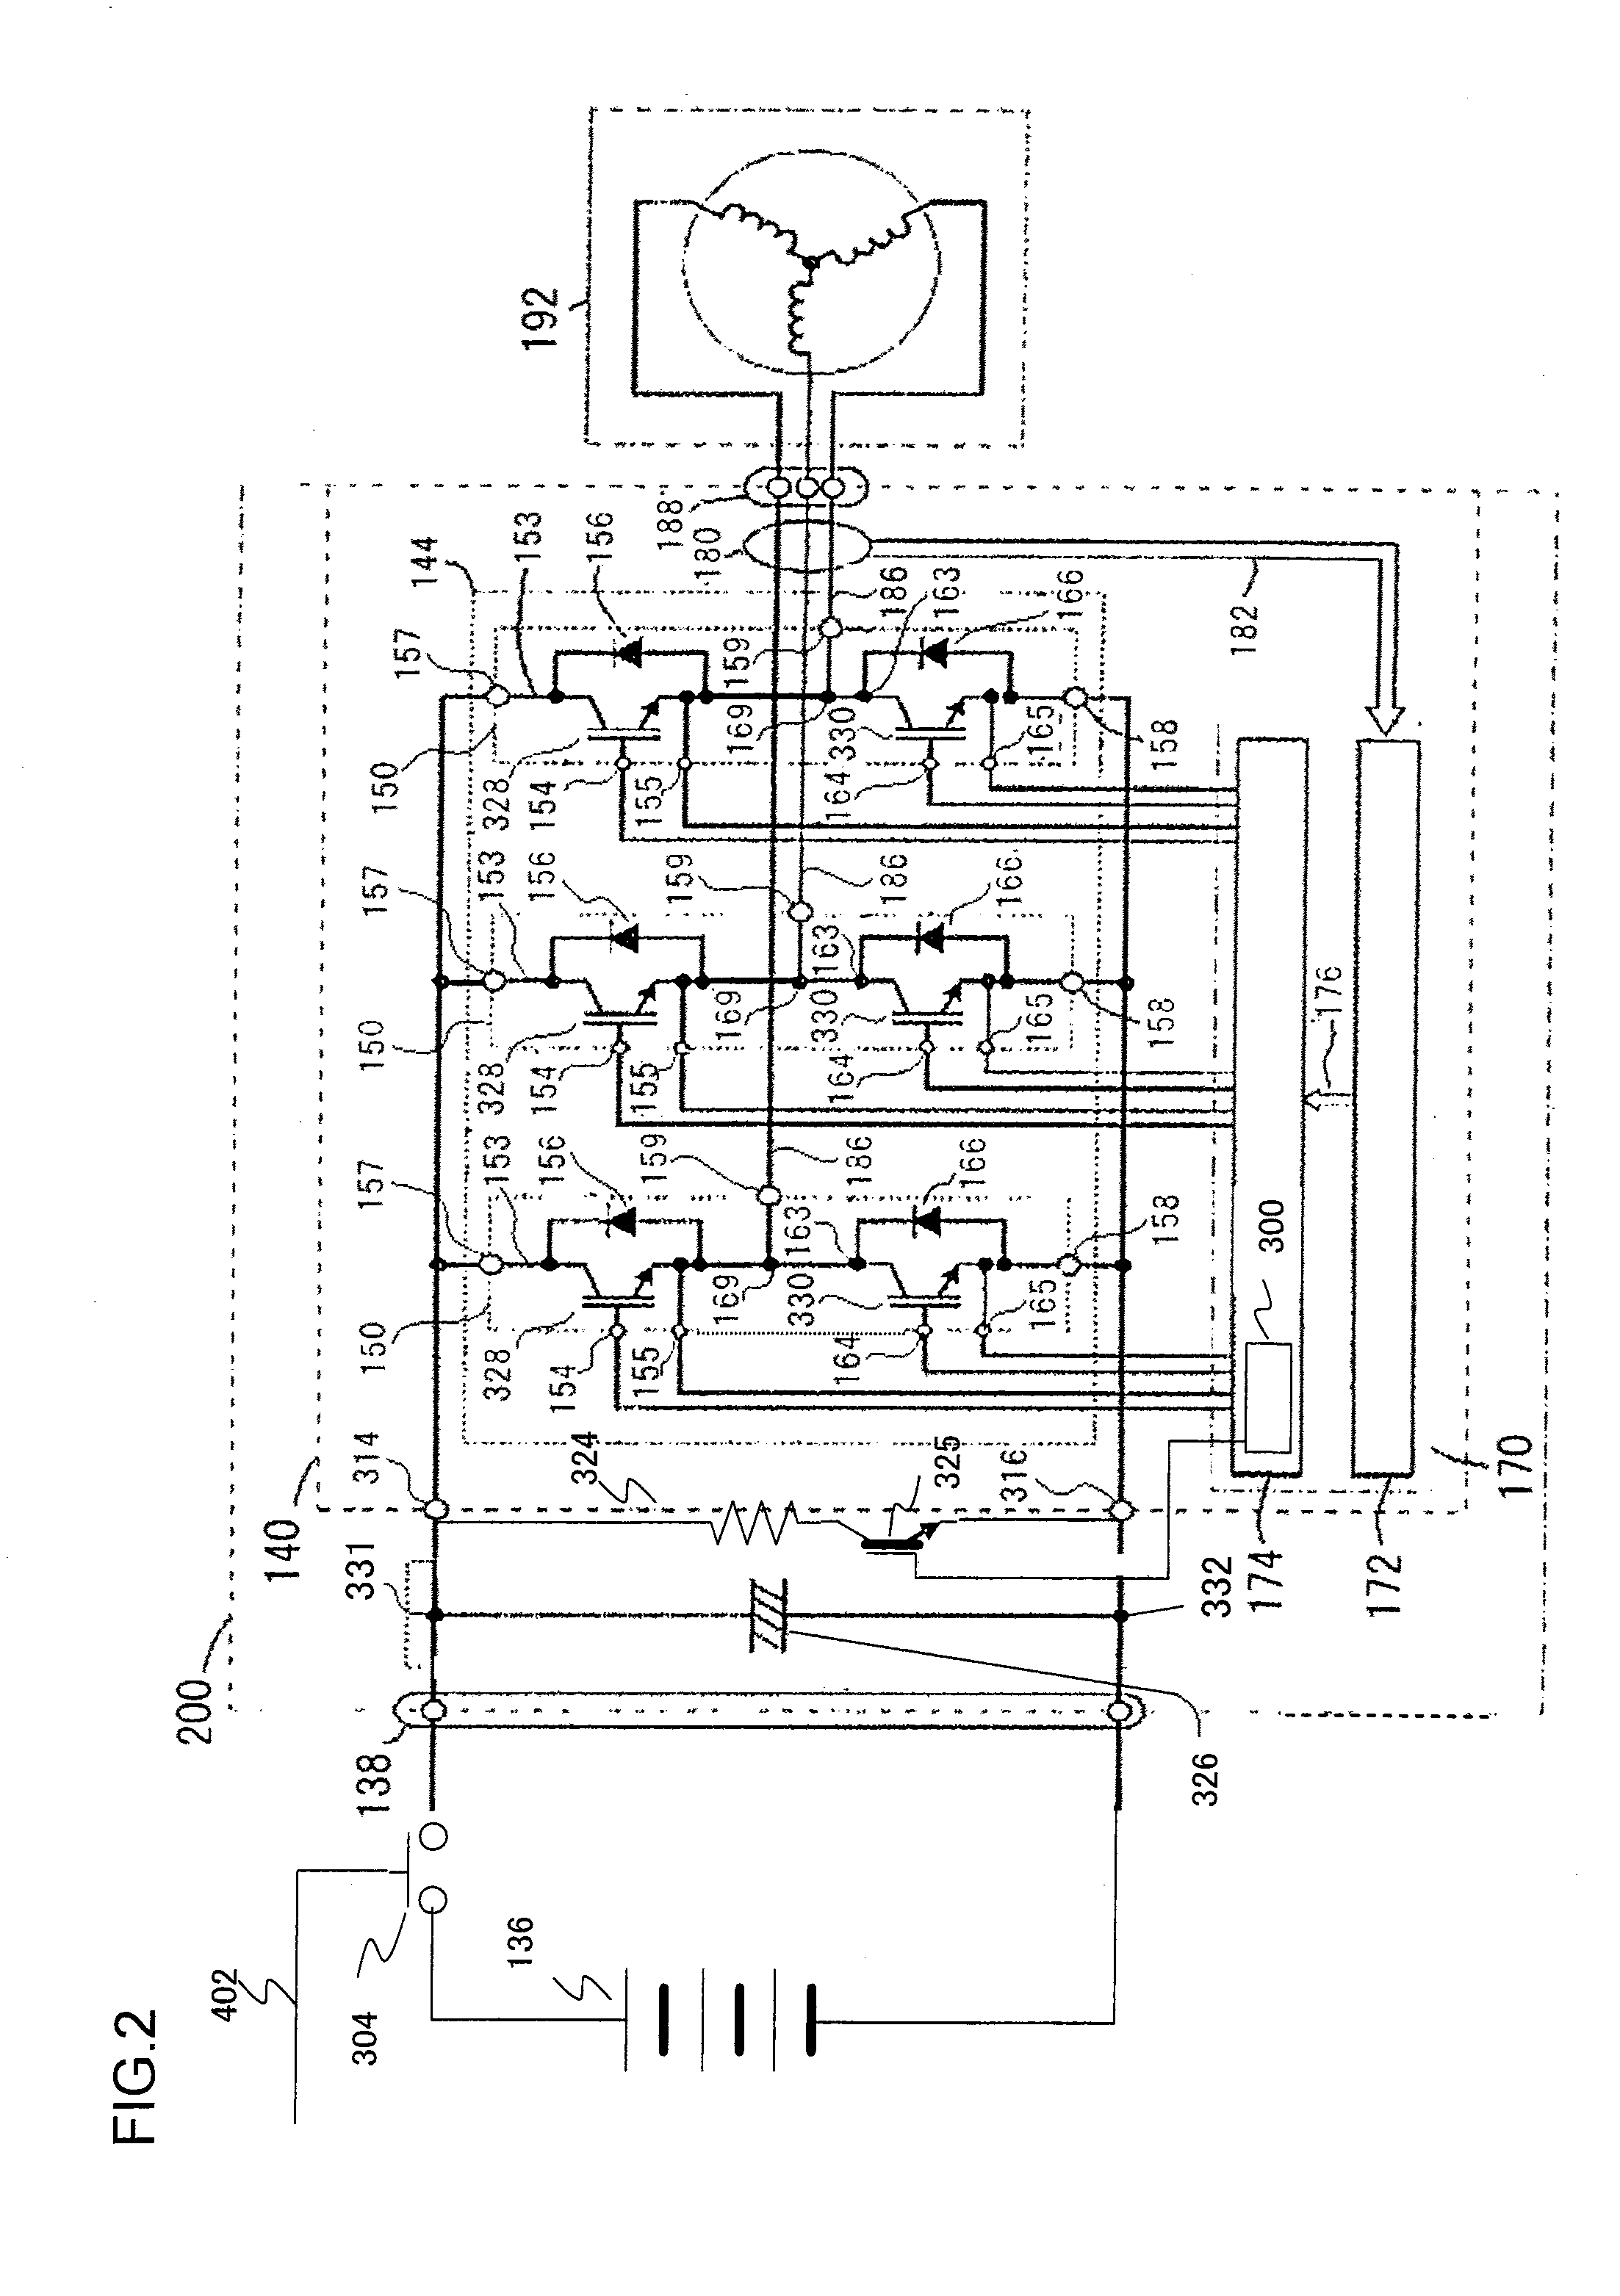 Discharge Circuit for Smoothing Capacitor of DC Power Supply